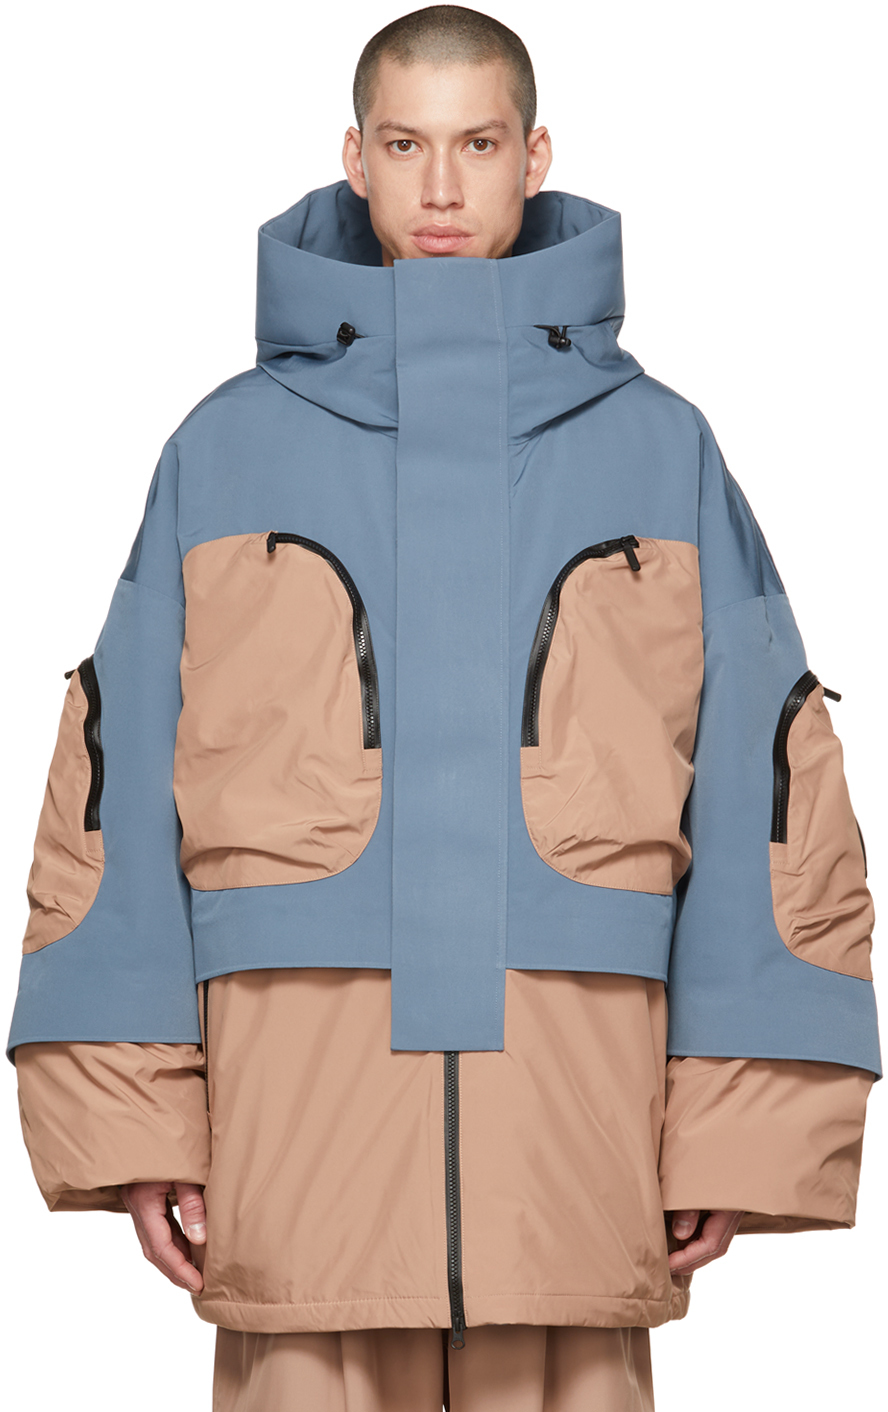 A. A. Spectrum Blue & Taupe Alfire Down Jacket